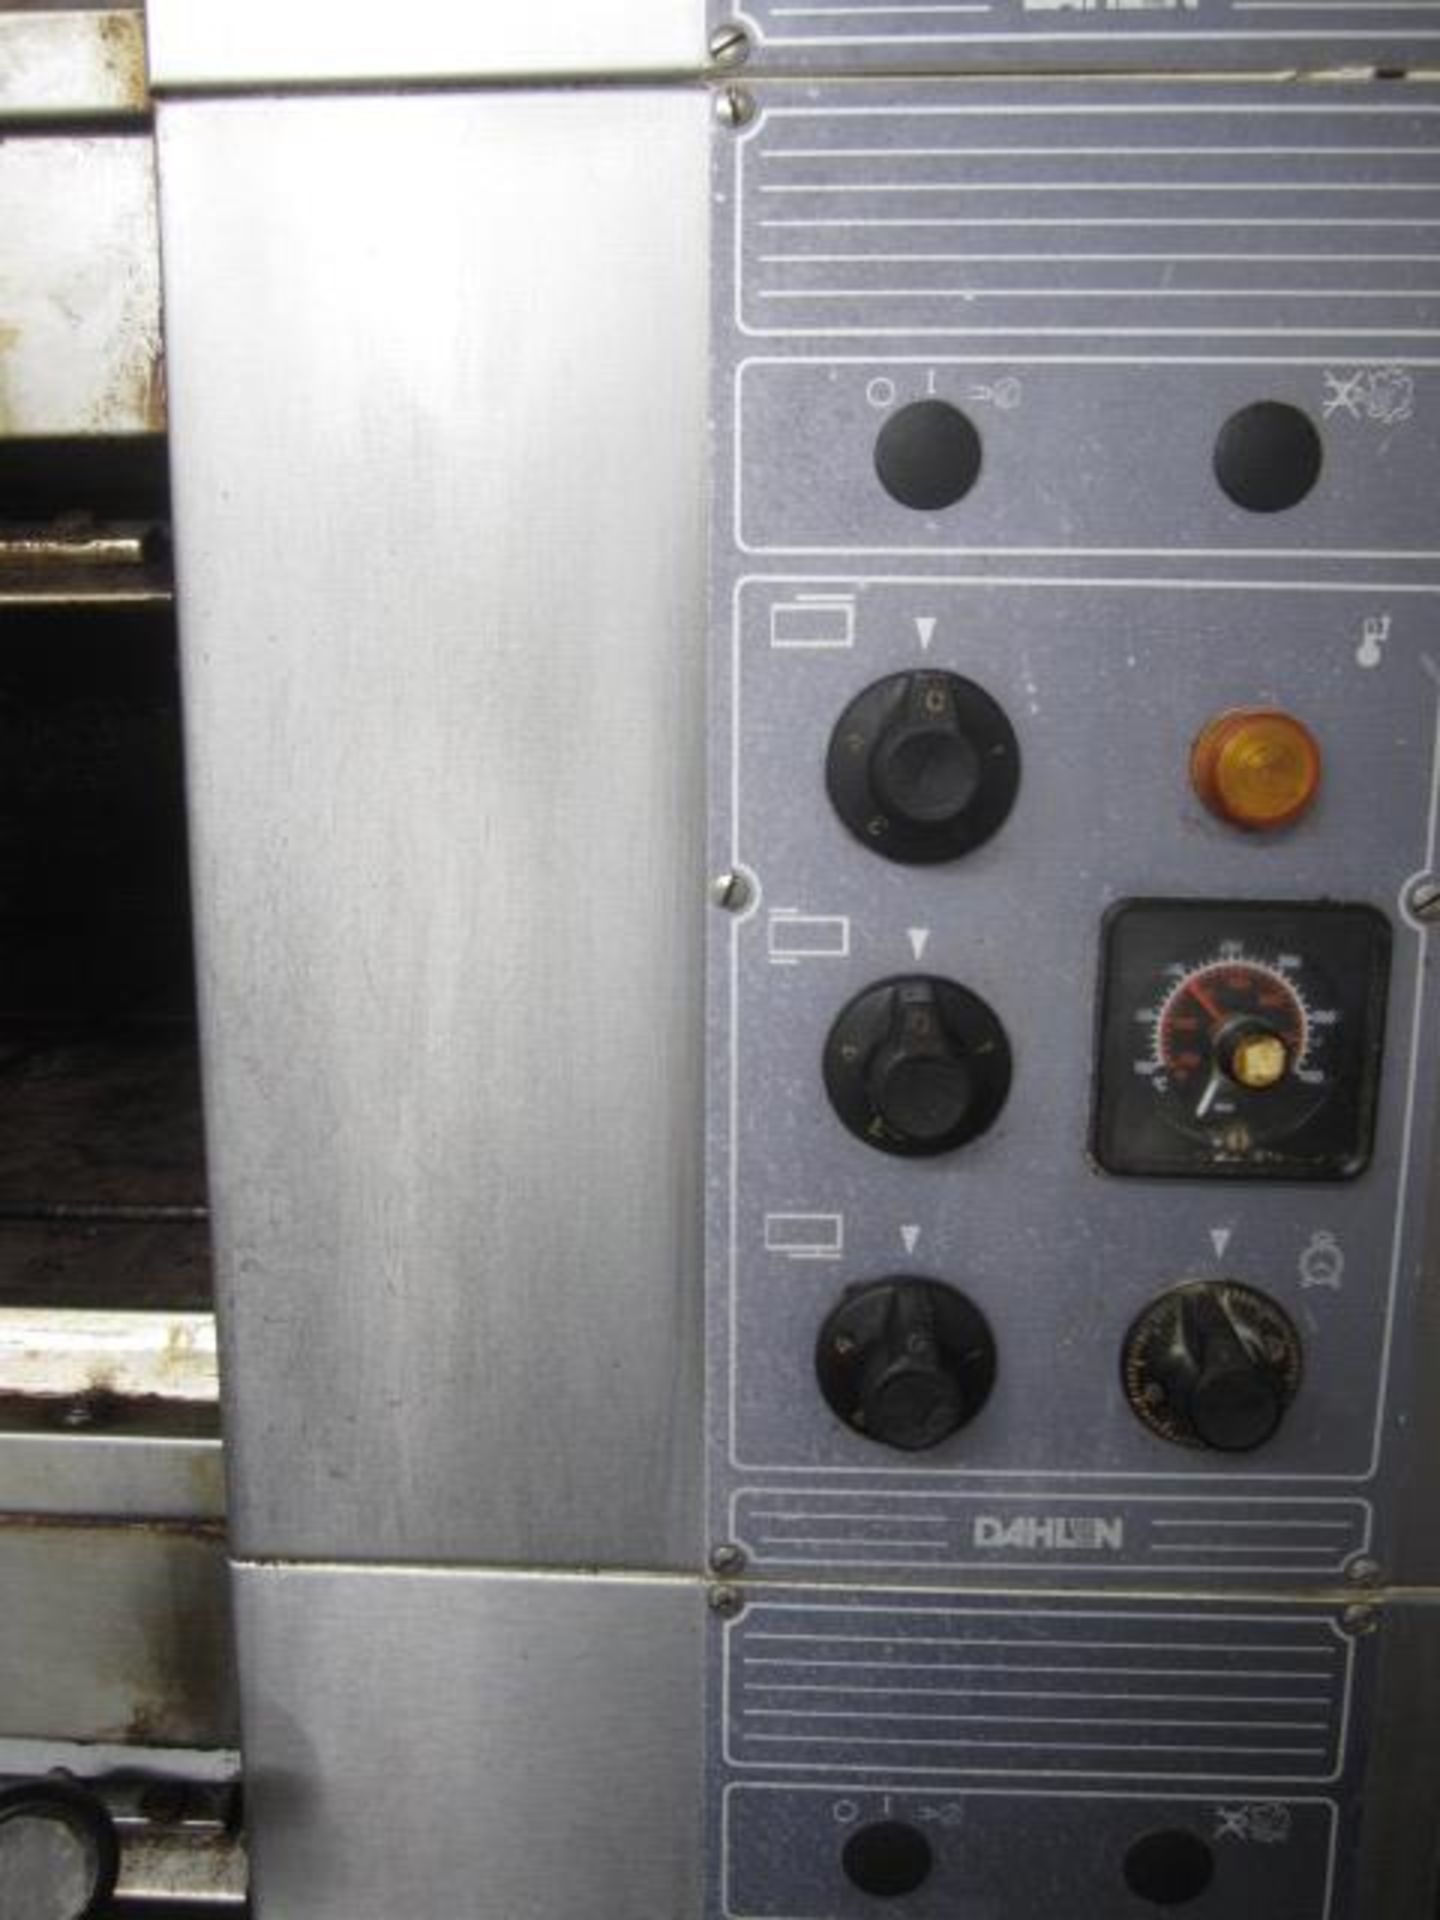 Dahlen stainless steel commercial 4 deck oven, 56" deck width, approx. overall size: 1950mm x 2010mm - Image 6 of 7